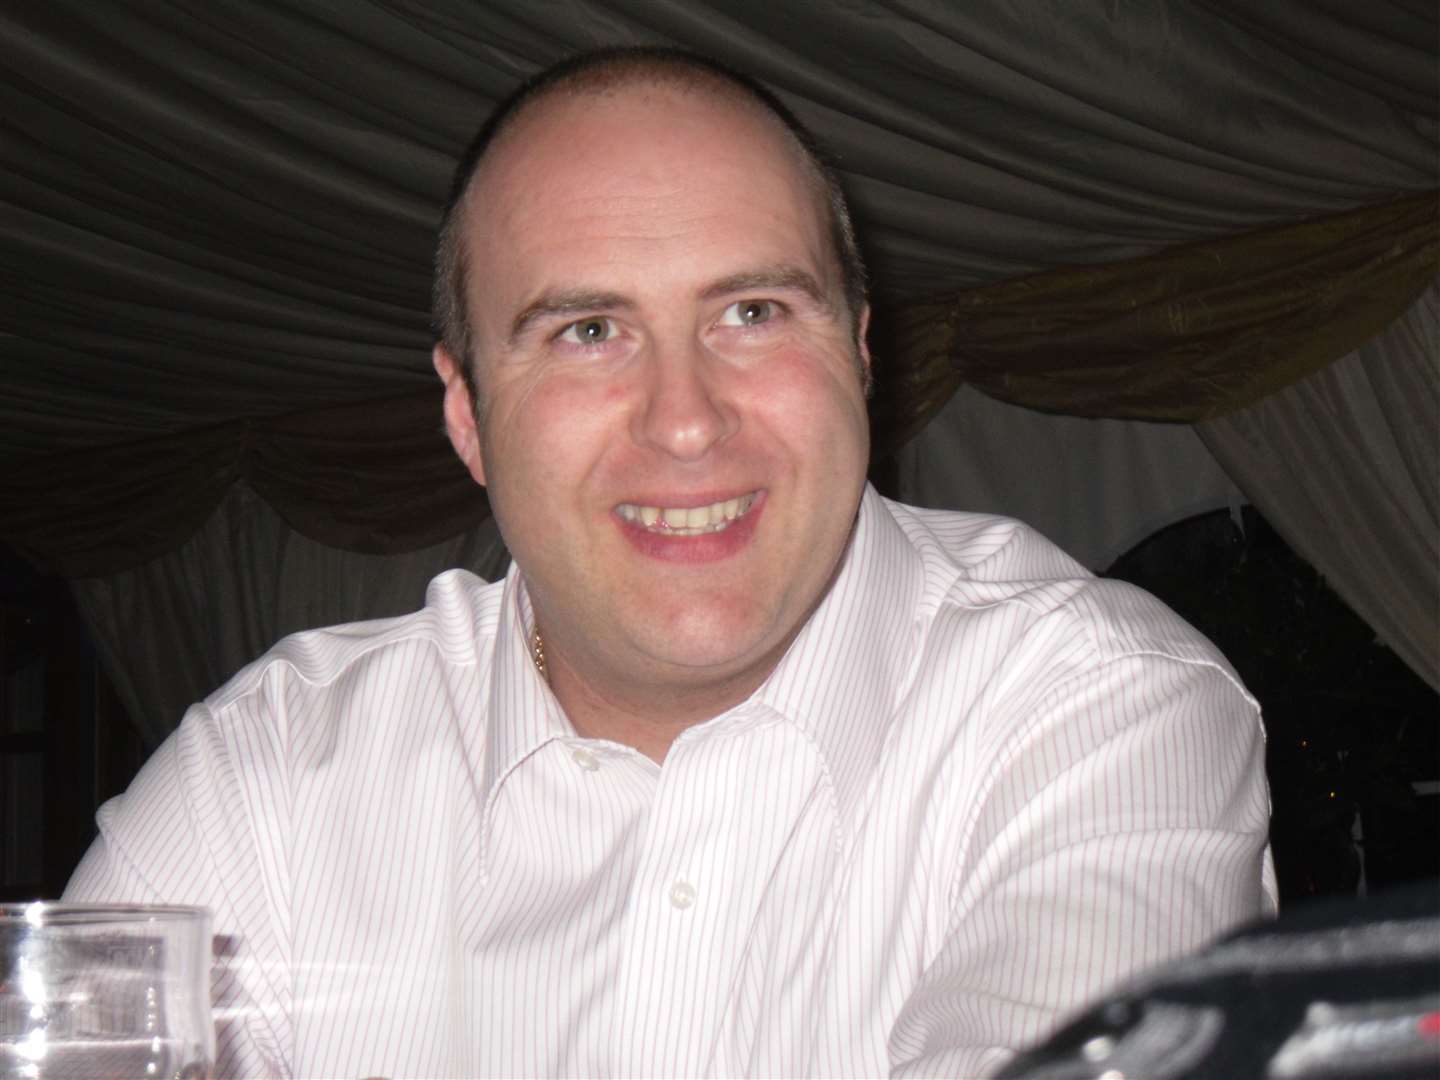 Dean Smith from Maidstone, who died in a bike accident in Surrey in May 2009